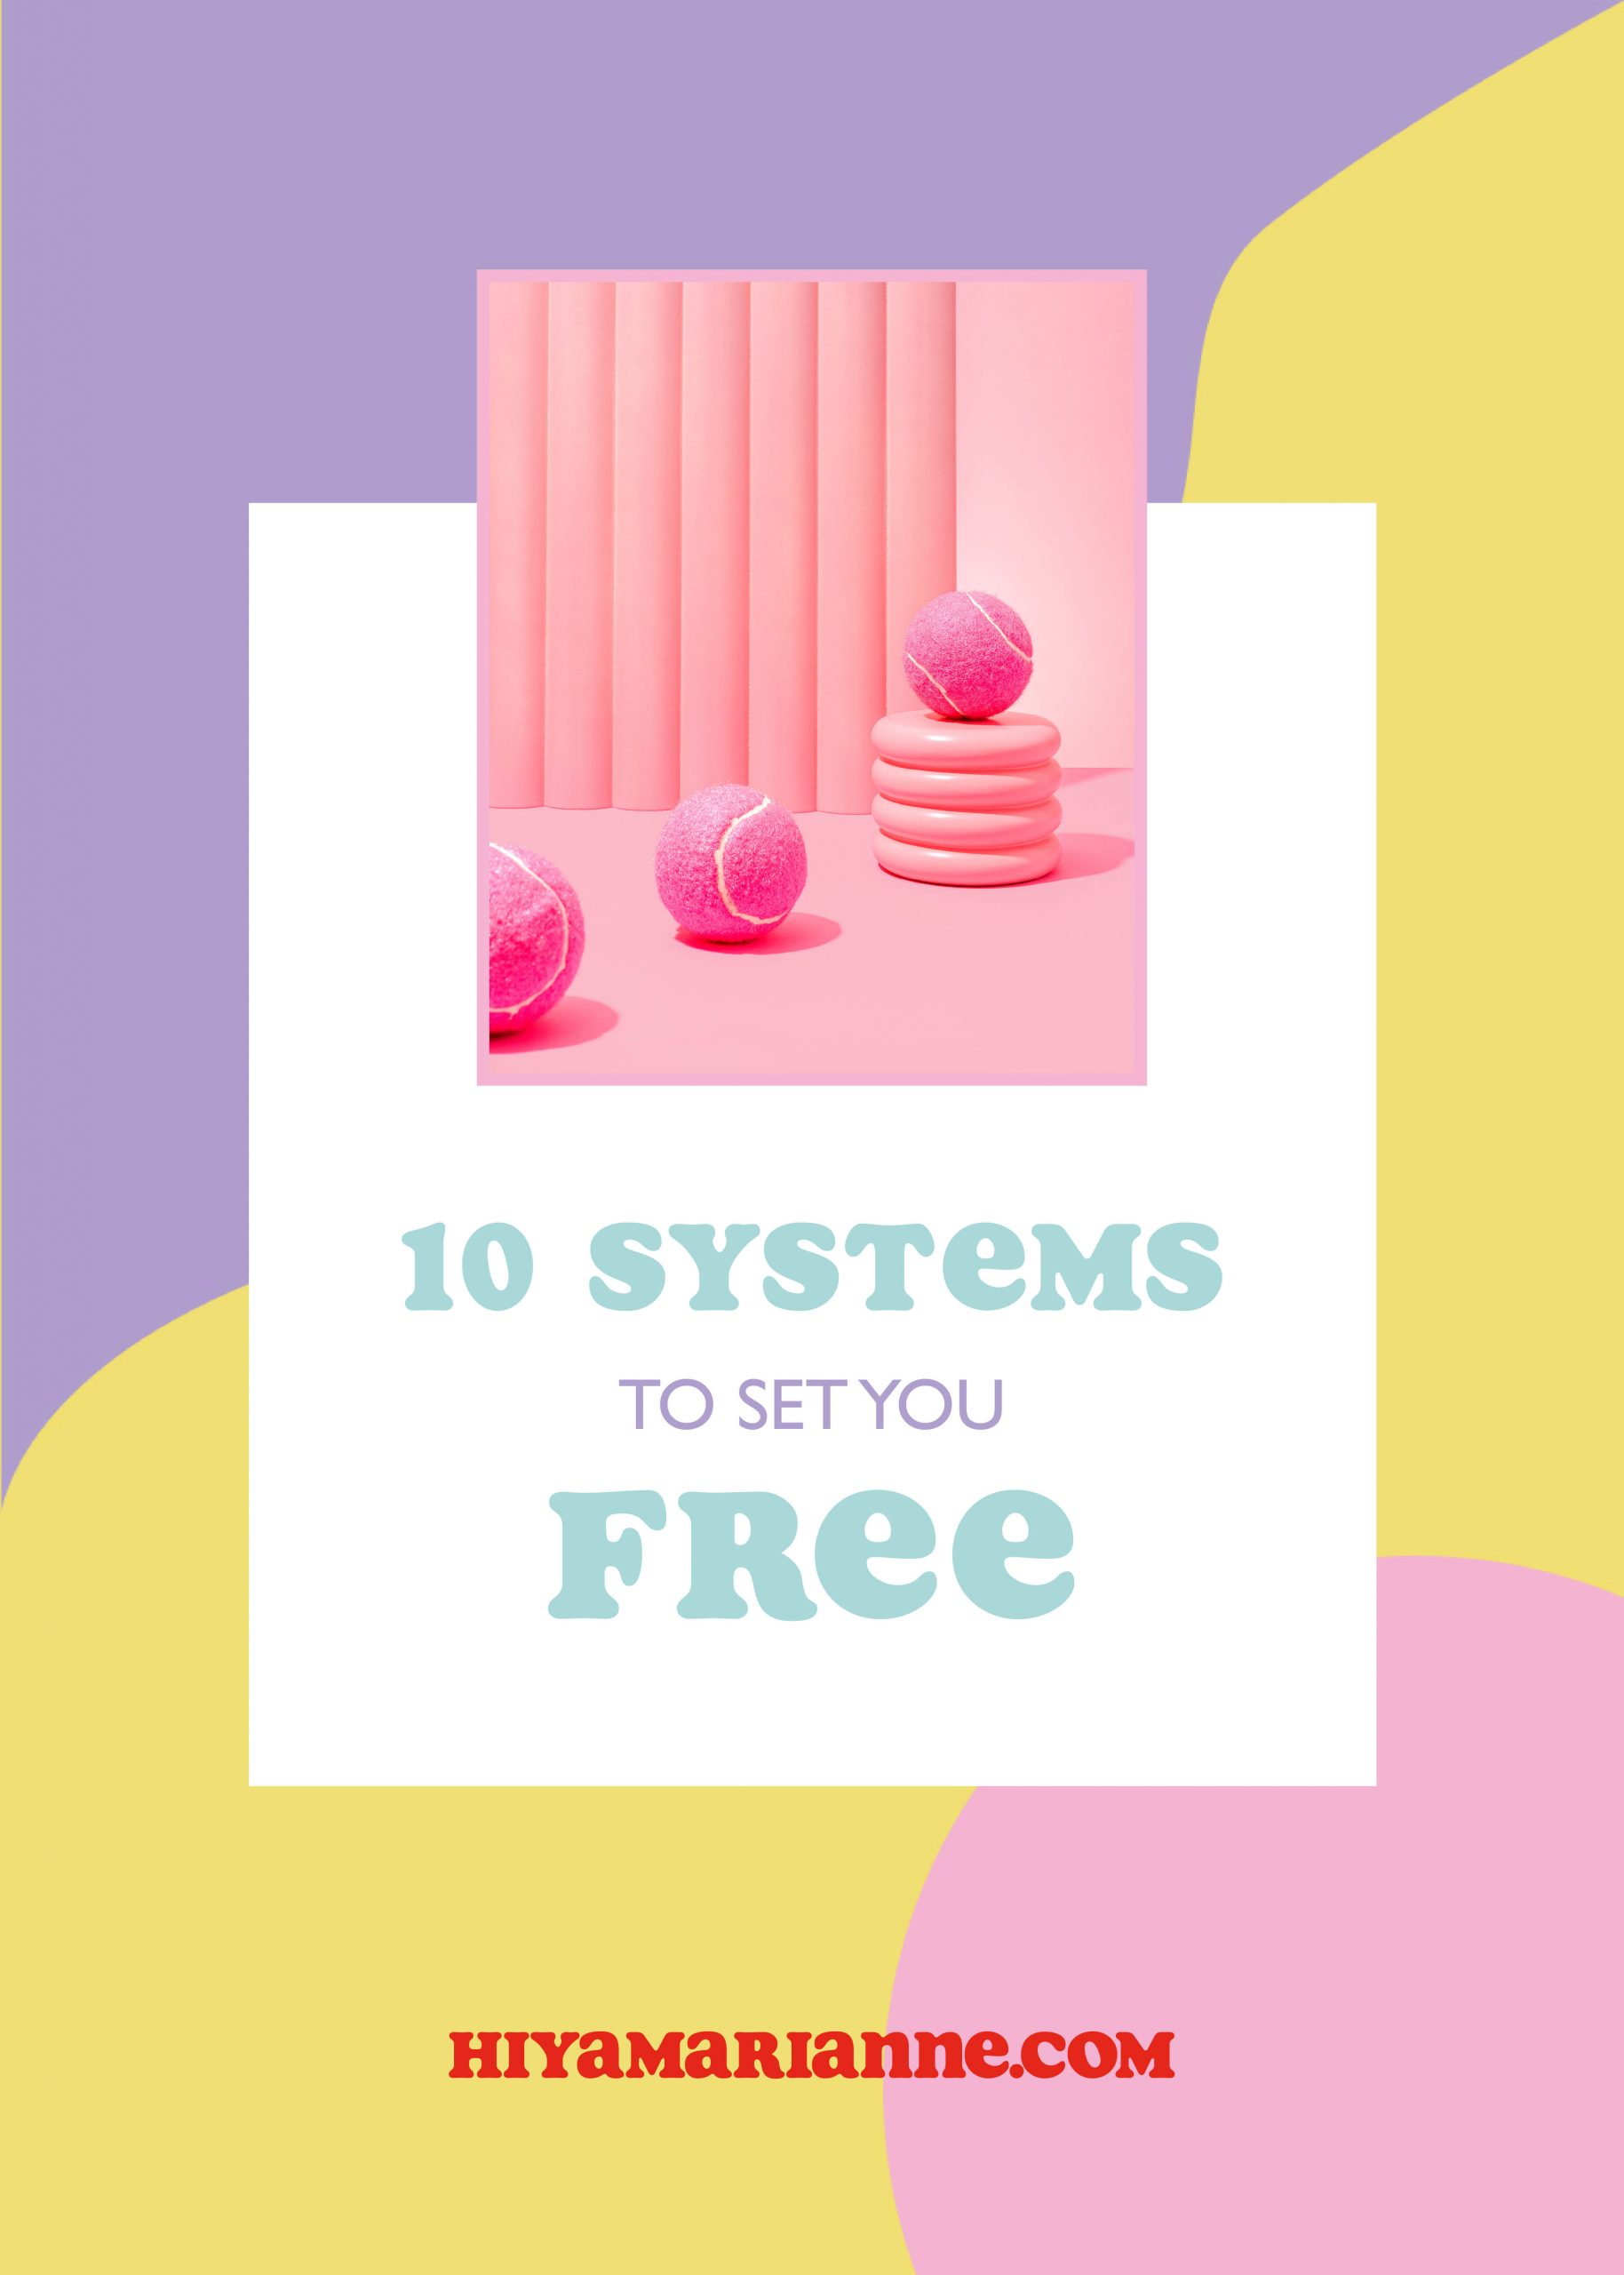 10 systems to set you free by HIYA MARIANNE.